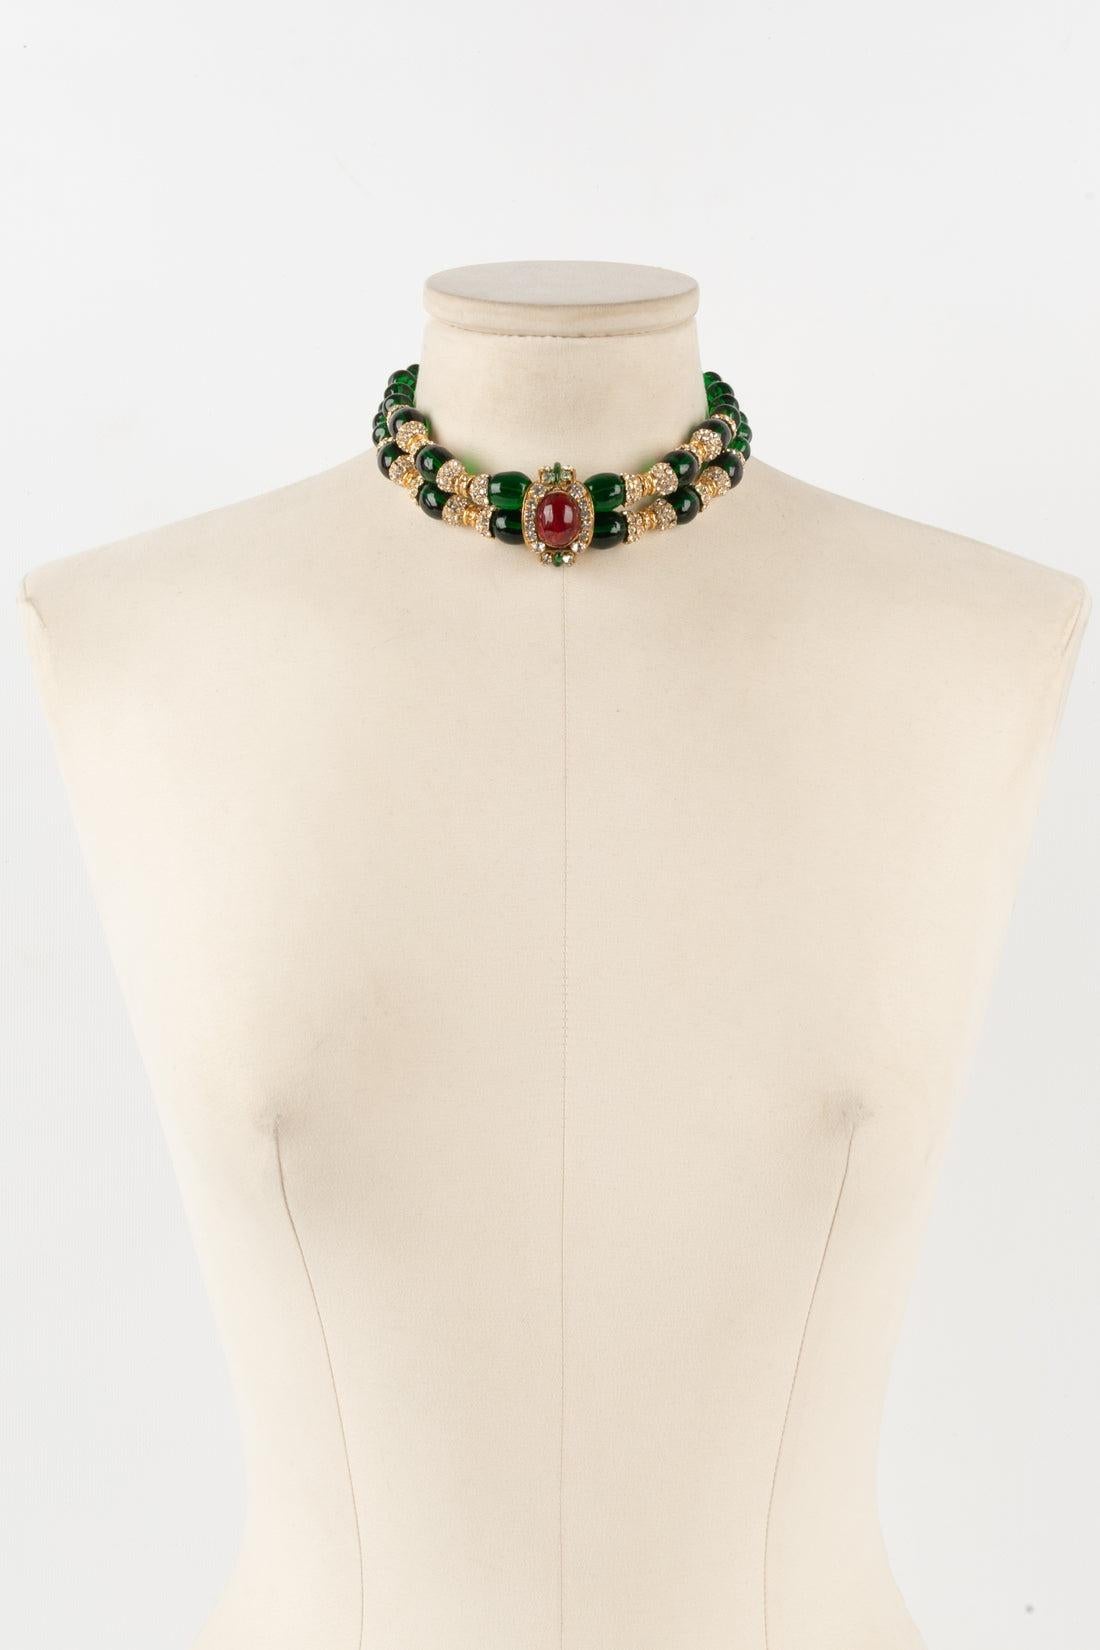 Chanel - (Made in France) Golden metal choker with green glass pearls and rhinestone rings. 1983 Collection.

Additional information:
Condition: Very good condition
Dimensions: Length: from 36 cm to 38 cm
Period: 20th Century

Seller Reference: